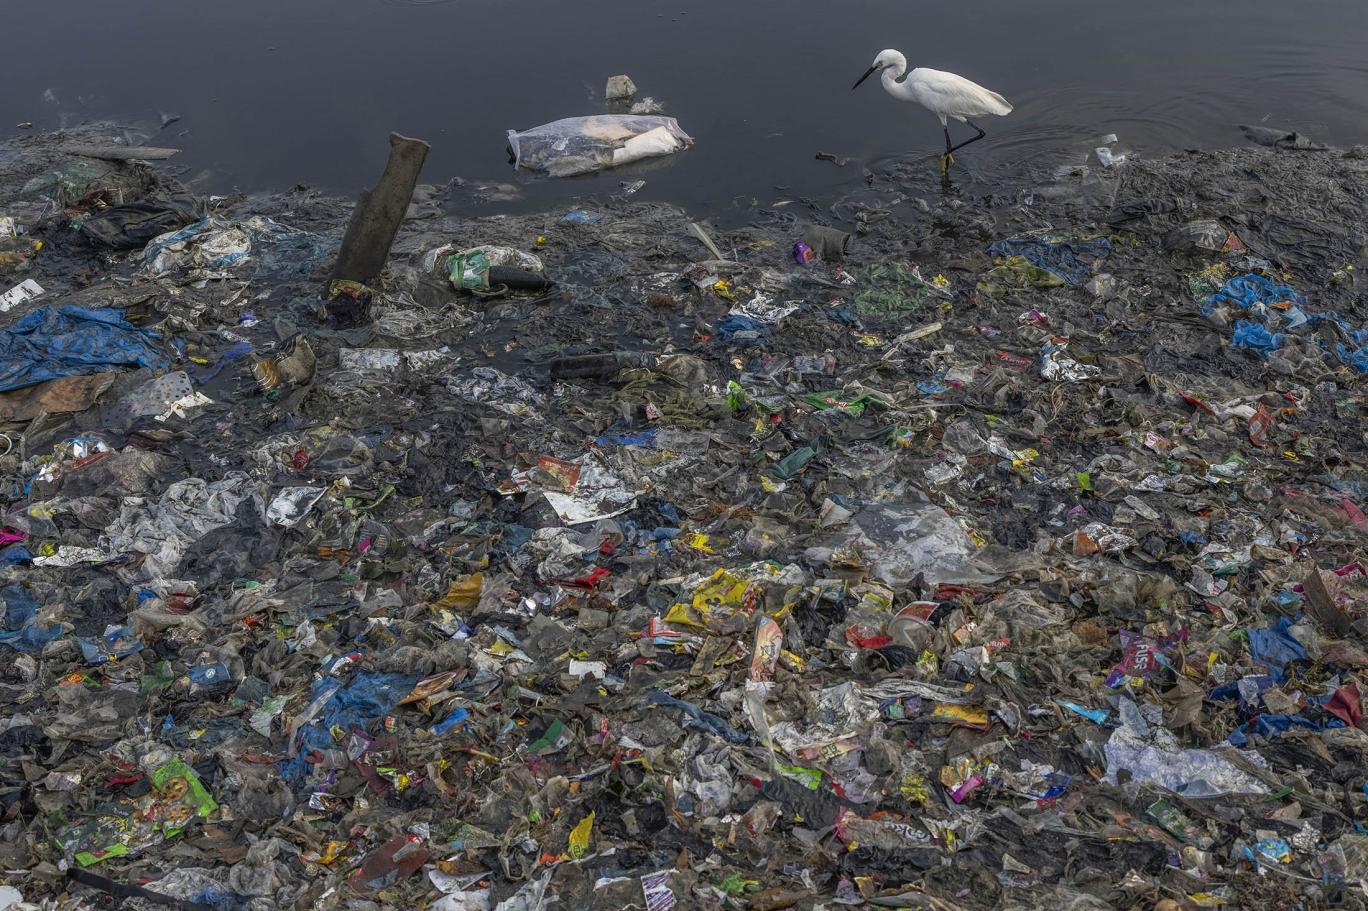 It turns out that plastic production is increasing at the same rate as pollution